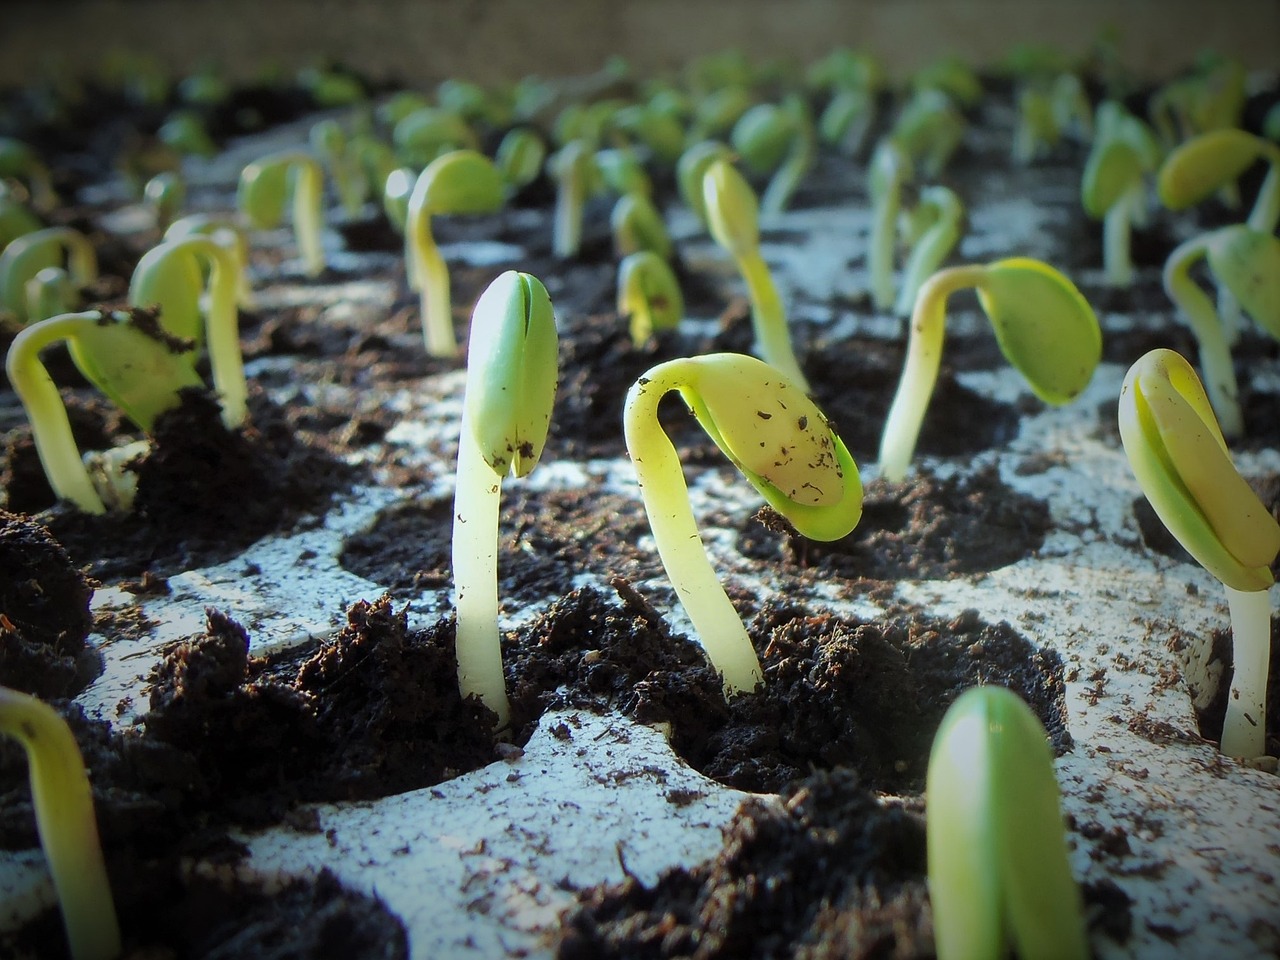 Soybeans emerging in the spring by jcesar2015 via Pixabay